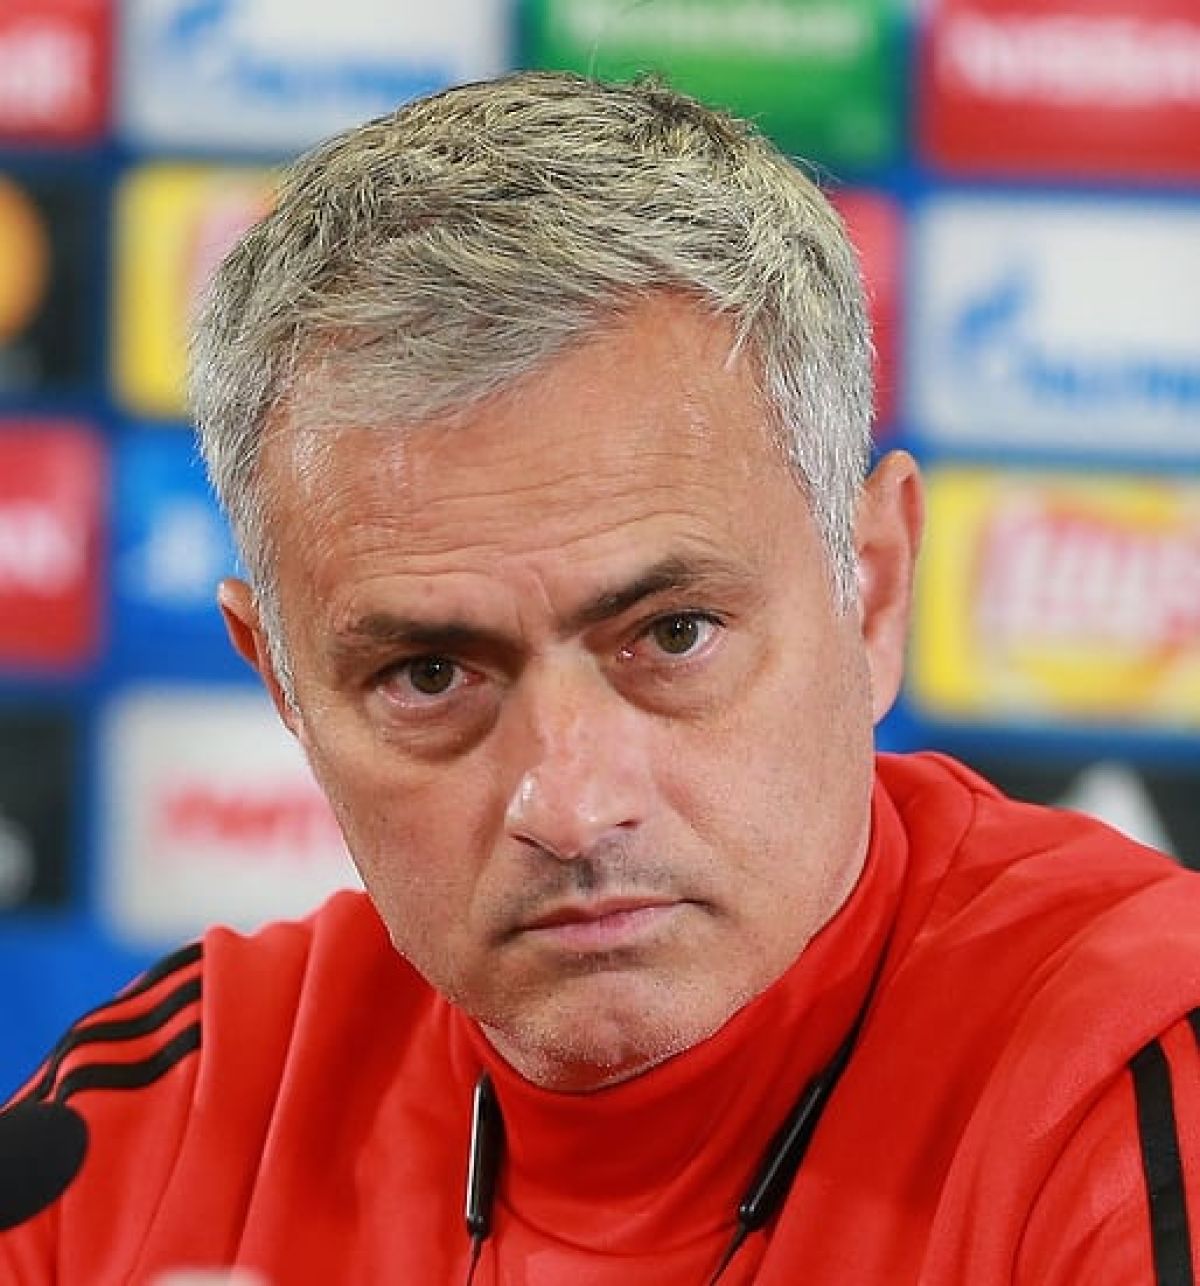 José Mourinho at Manchester United: The impossible mission?